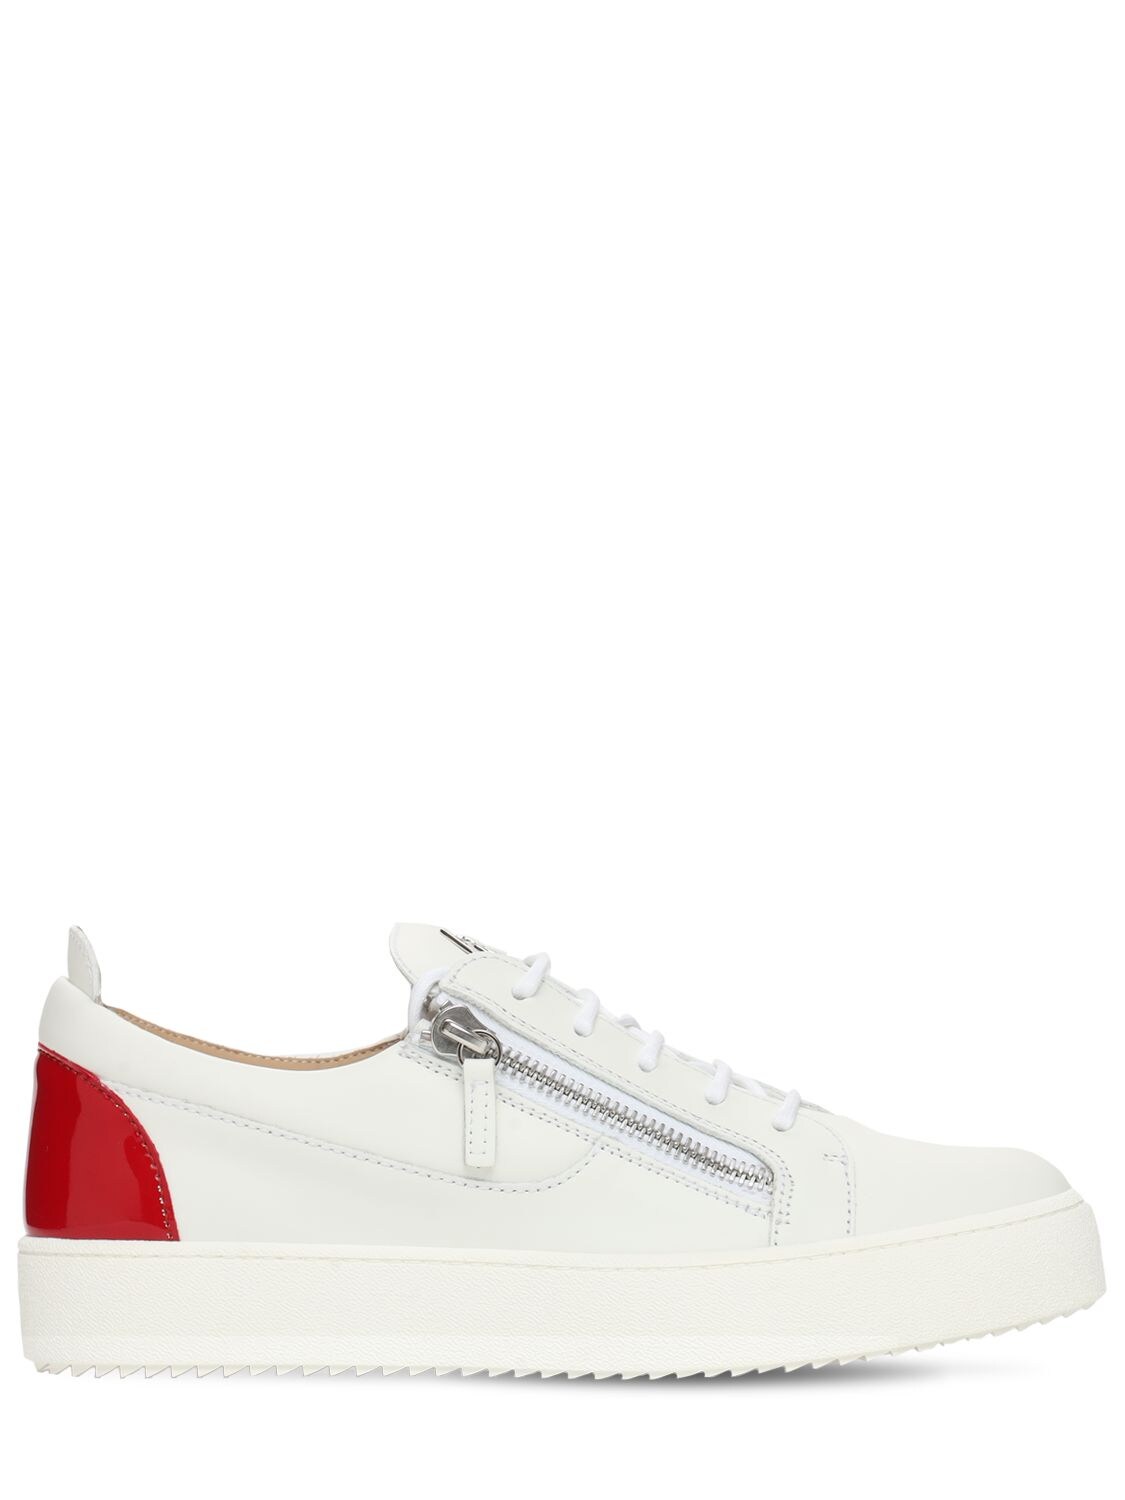 Giuseppe Zanotti Men's May London Patent Leather Low-top Sneakers In White,red